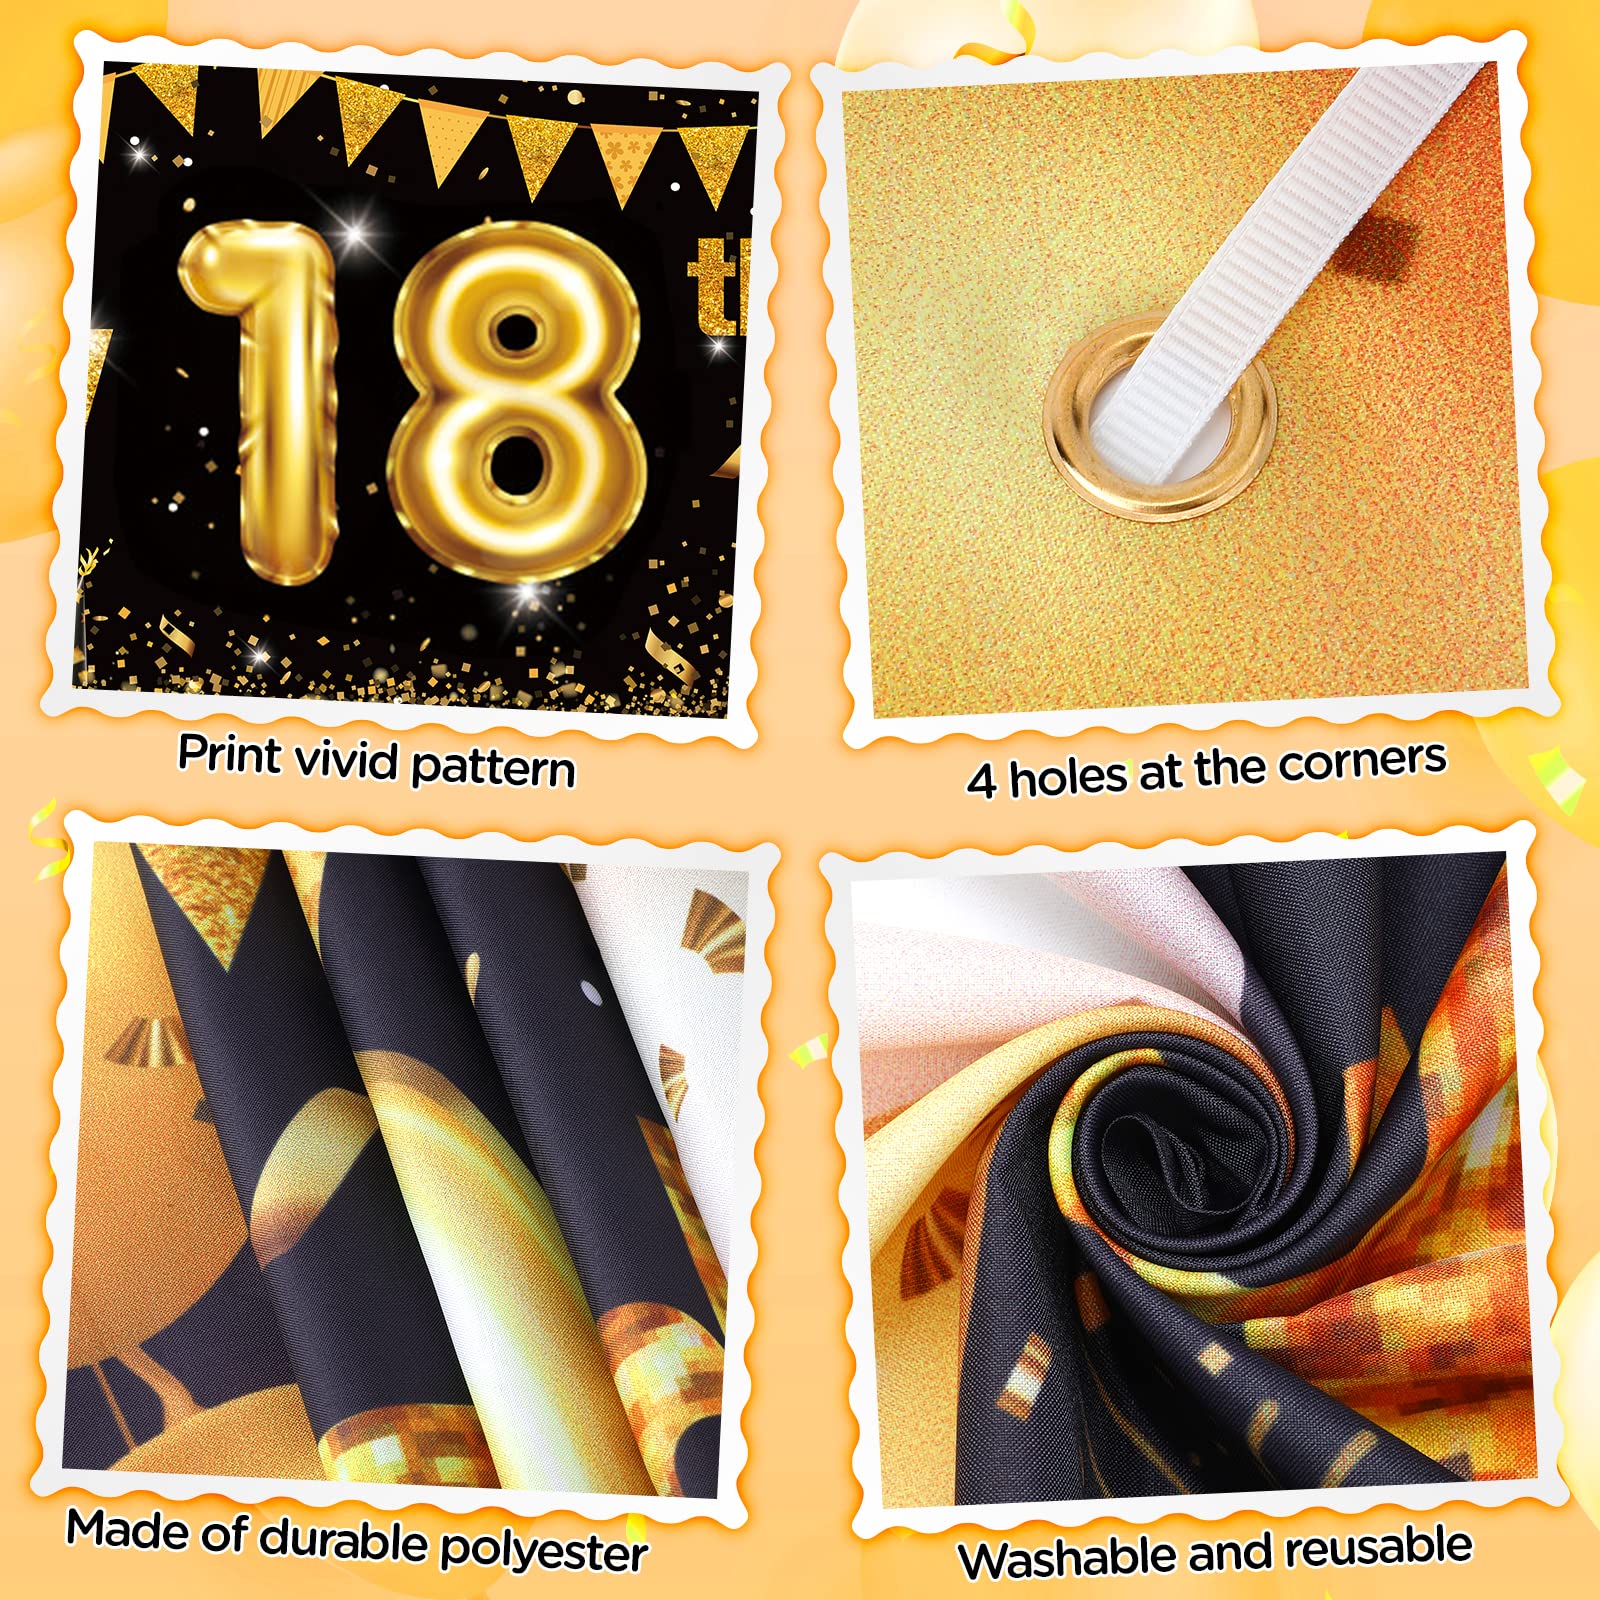 18th Birthday Decorations for Boys Girls and Gold, Black Gold Birthday Yard Banner Sign and 18PCS 18th Happy Birthday Confetti Balloons for 18th Anniversary Birthday Party Supplies Outdoor Yard Decor